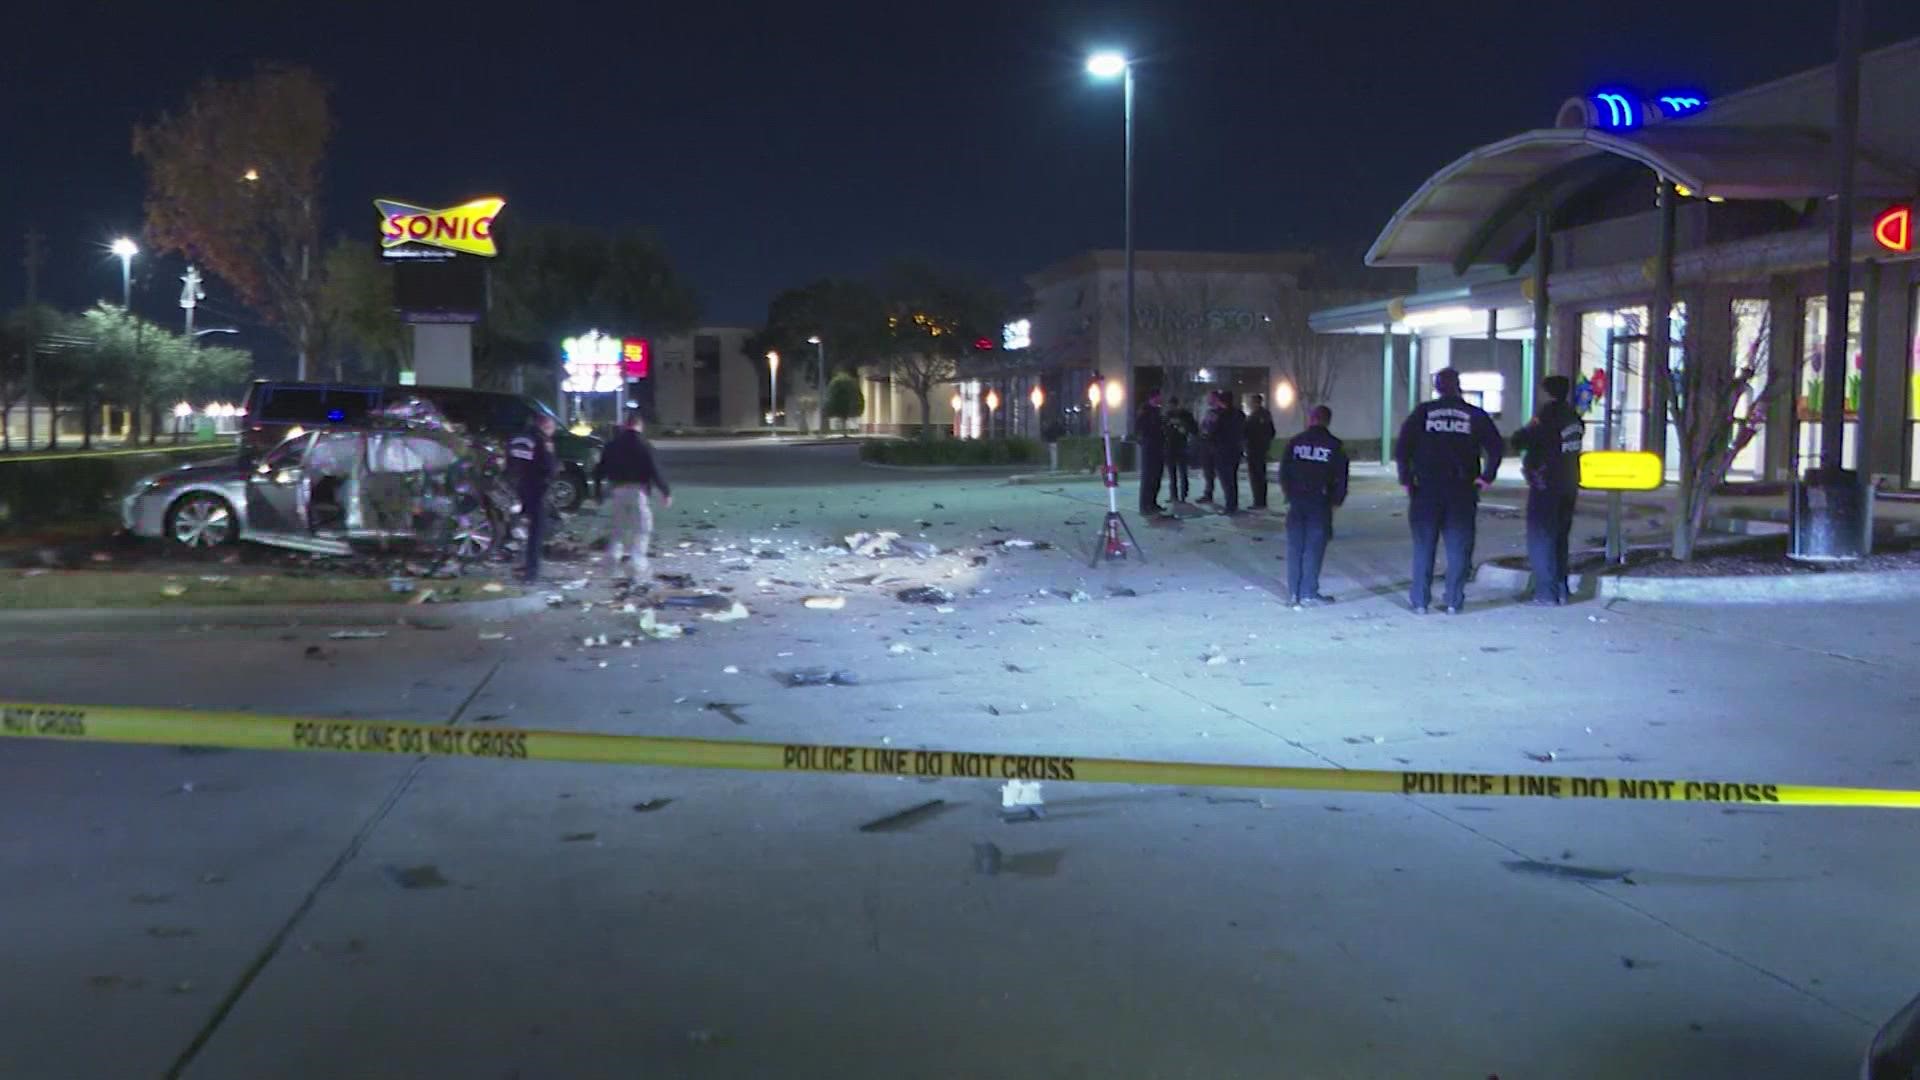 The explosion happened outside a Sonic restaurant. One person was injured, but it could have been much worse.